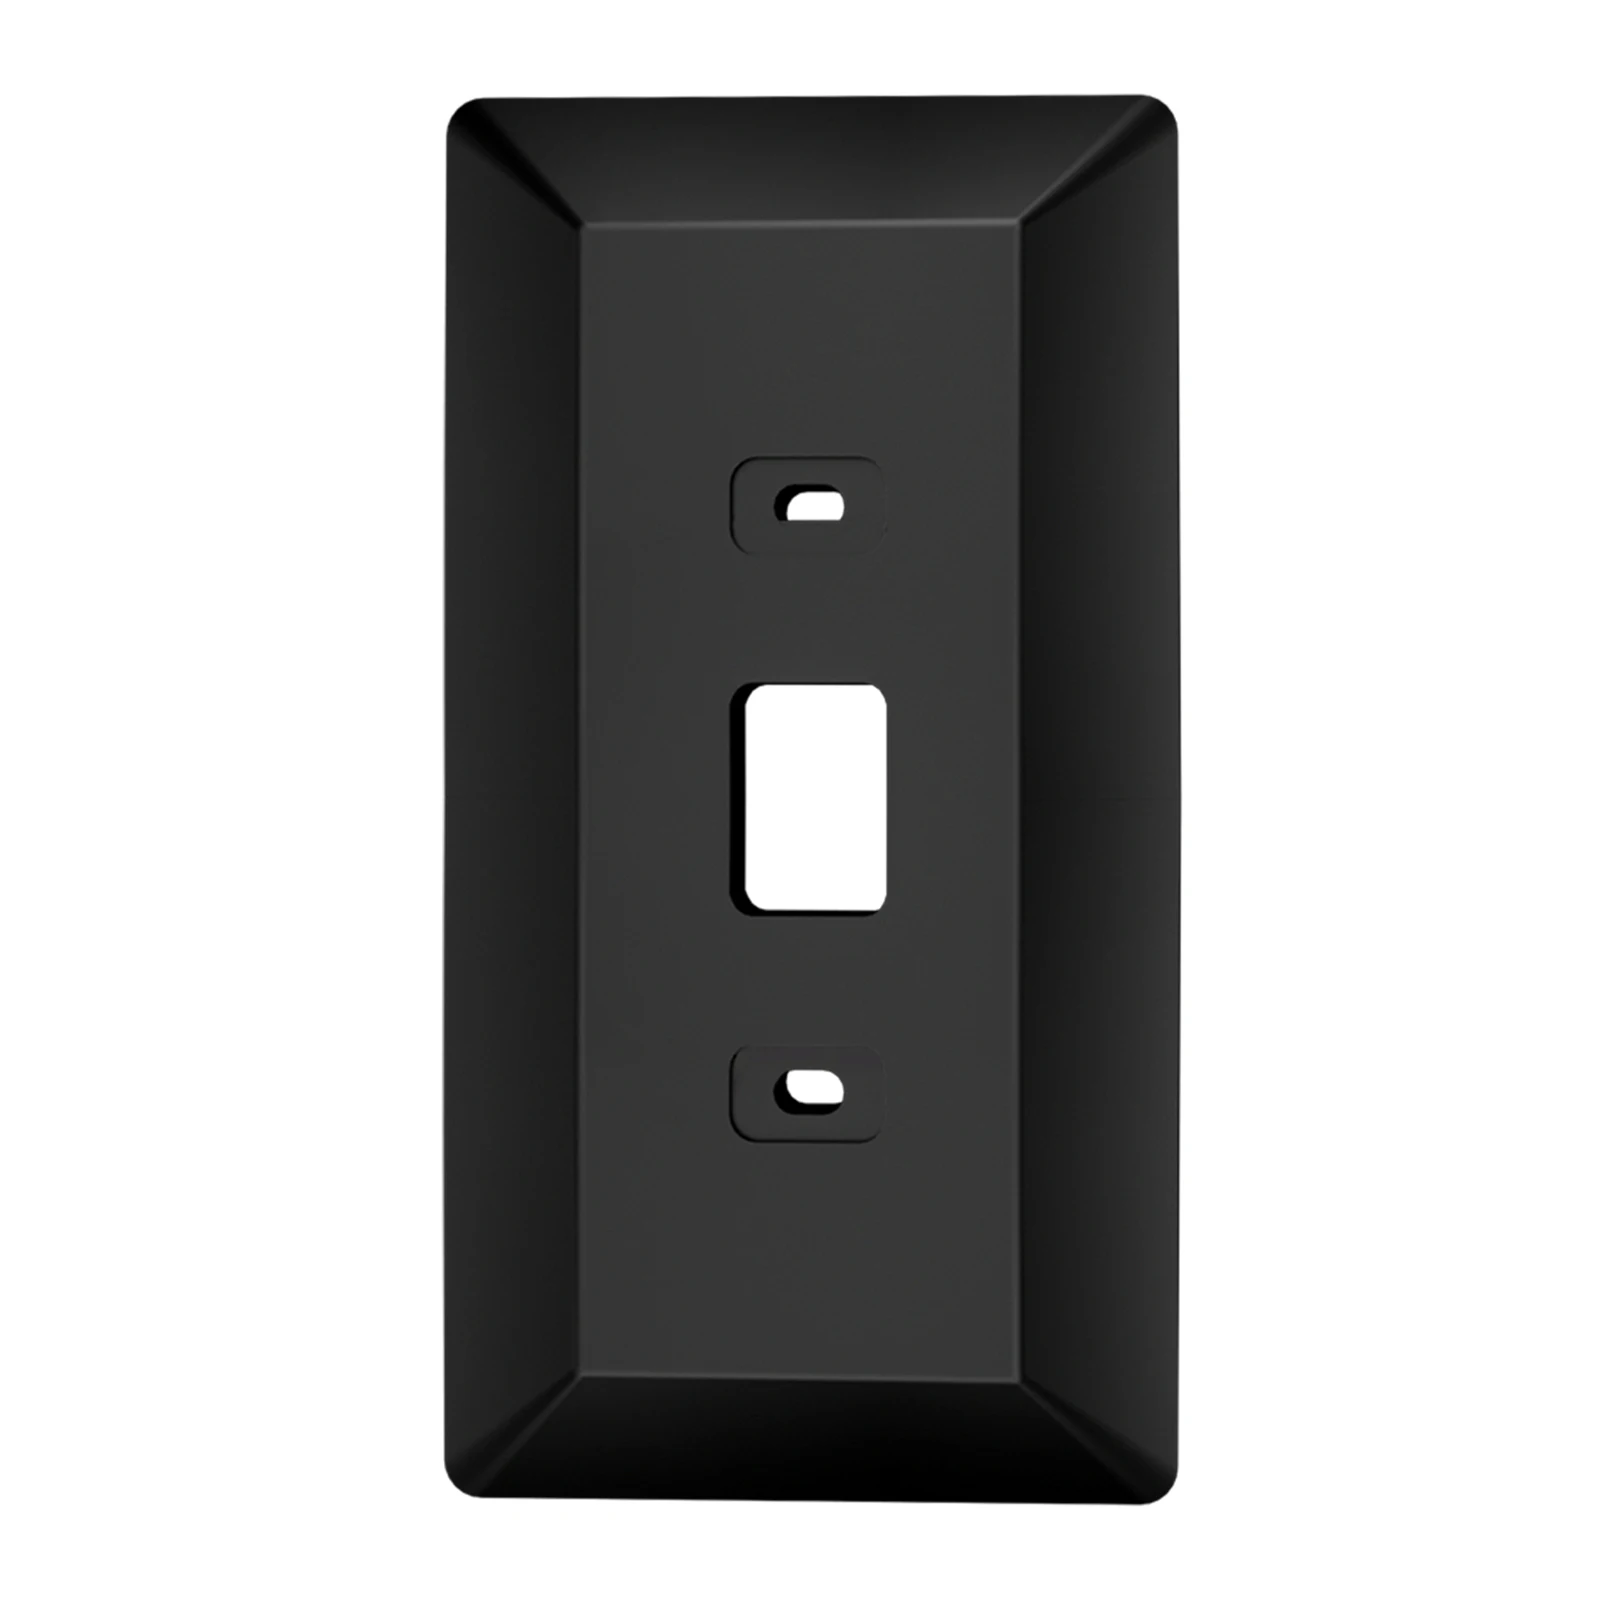 

Wall Plate Come with L35°/R35 ° Wedge Compatible With Eufy Video Doorbell 2K Resolution (Wired), 1080p Eufy Video Doorbell